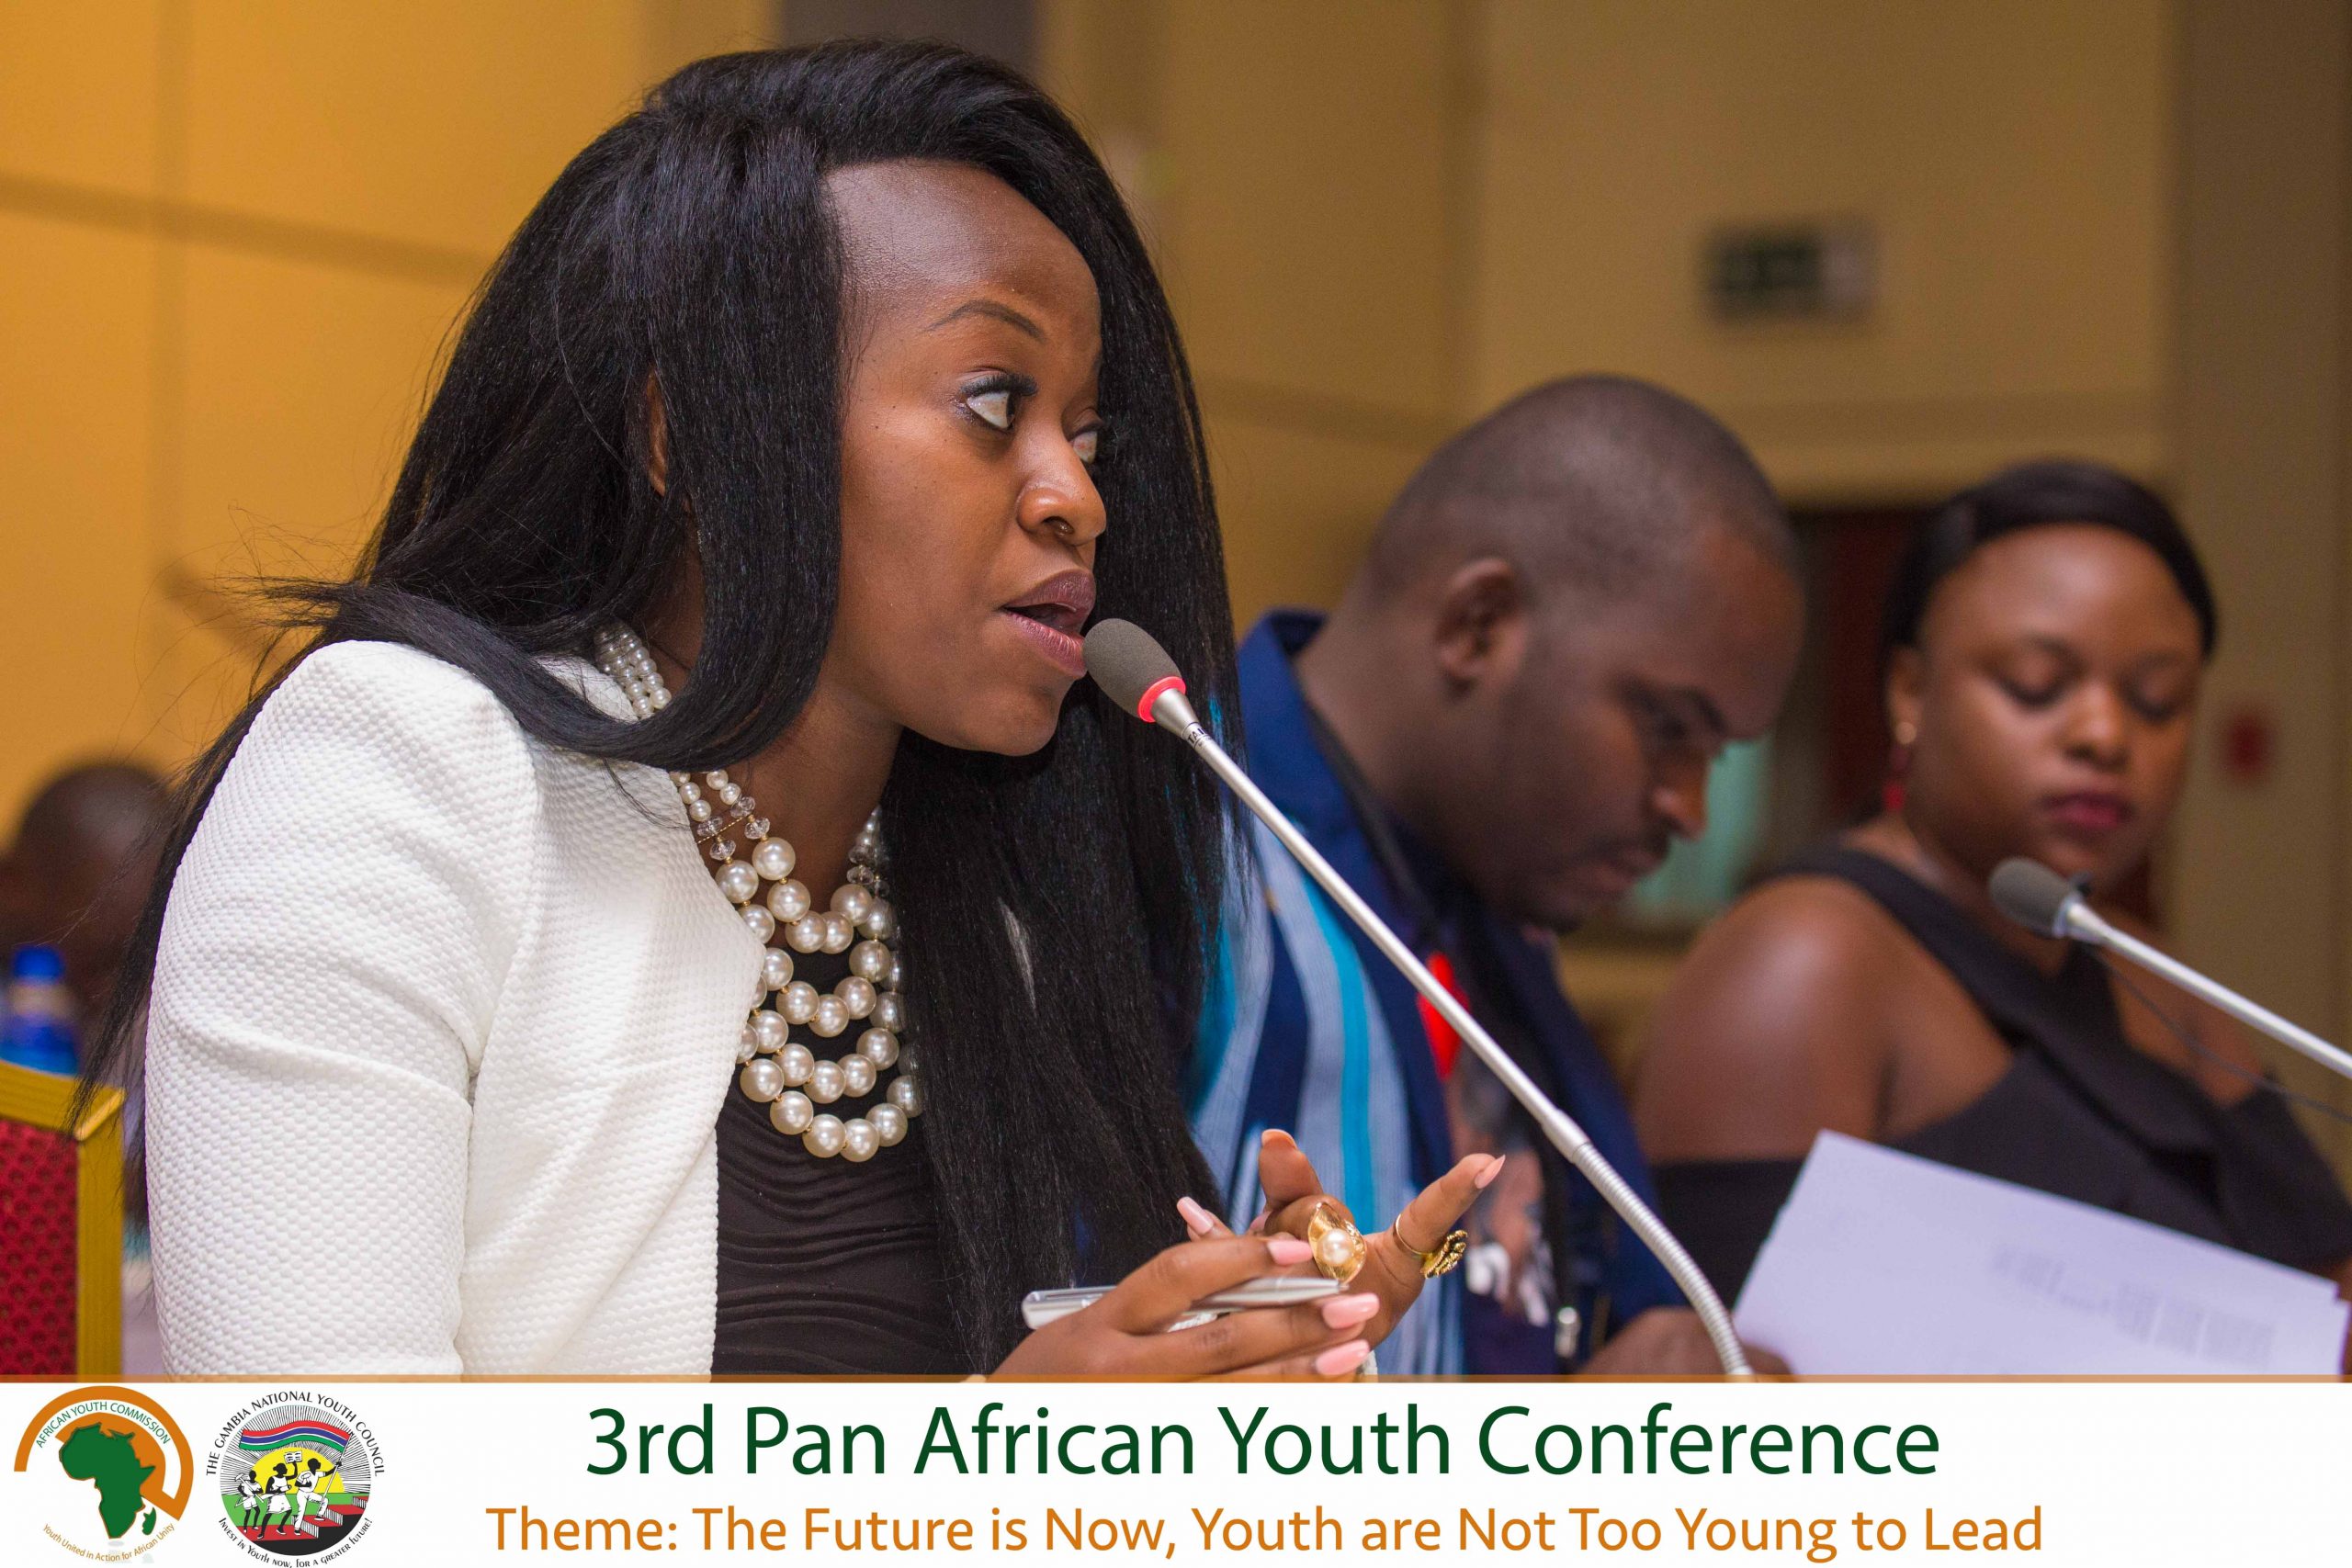 NOTICE OF A NEW DATE FOR THE 2020 ANNUAL GENERAL ASSEMBLY MEETING OF THE AFRICAN YOUTH COMMISSION (AYCGA)